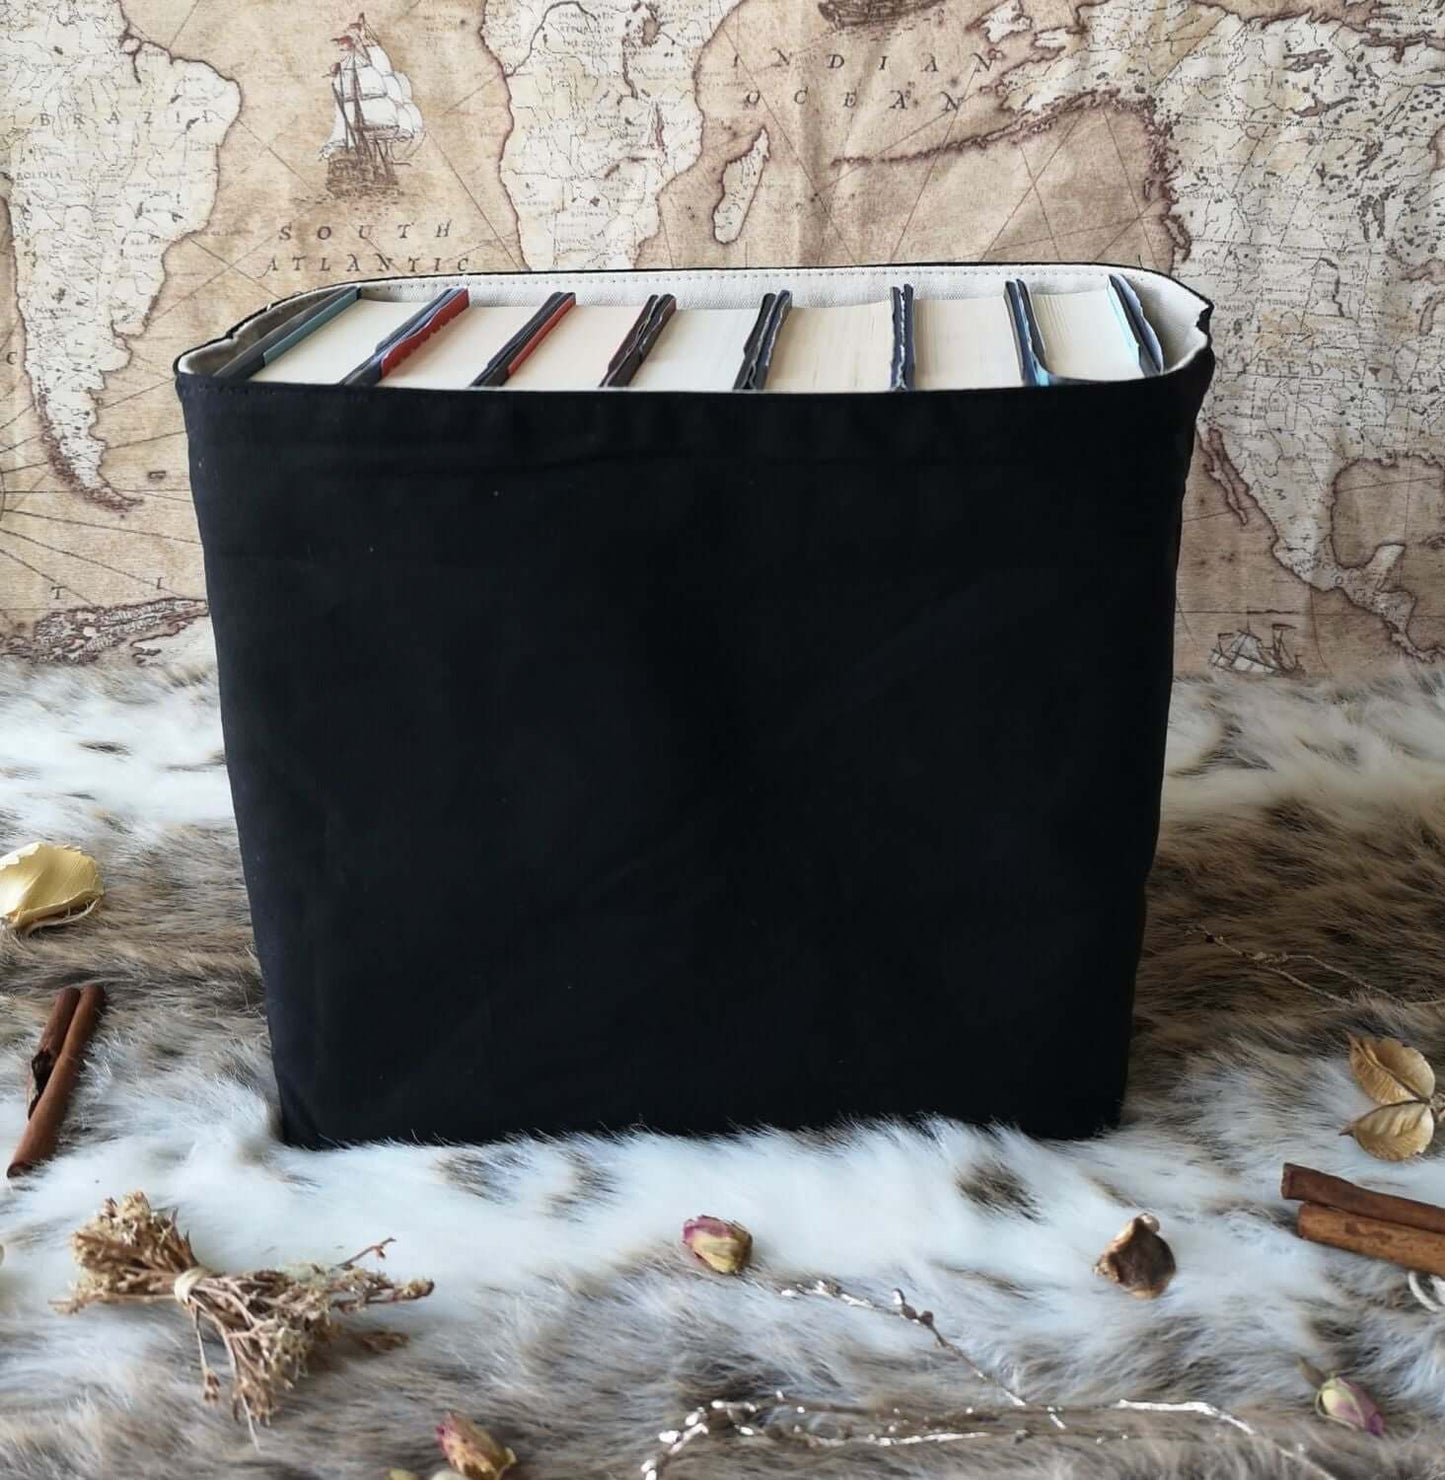 Book Basket / Canvas Organiser - Between The Pages of A Book - Large